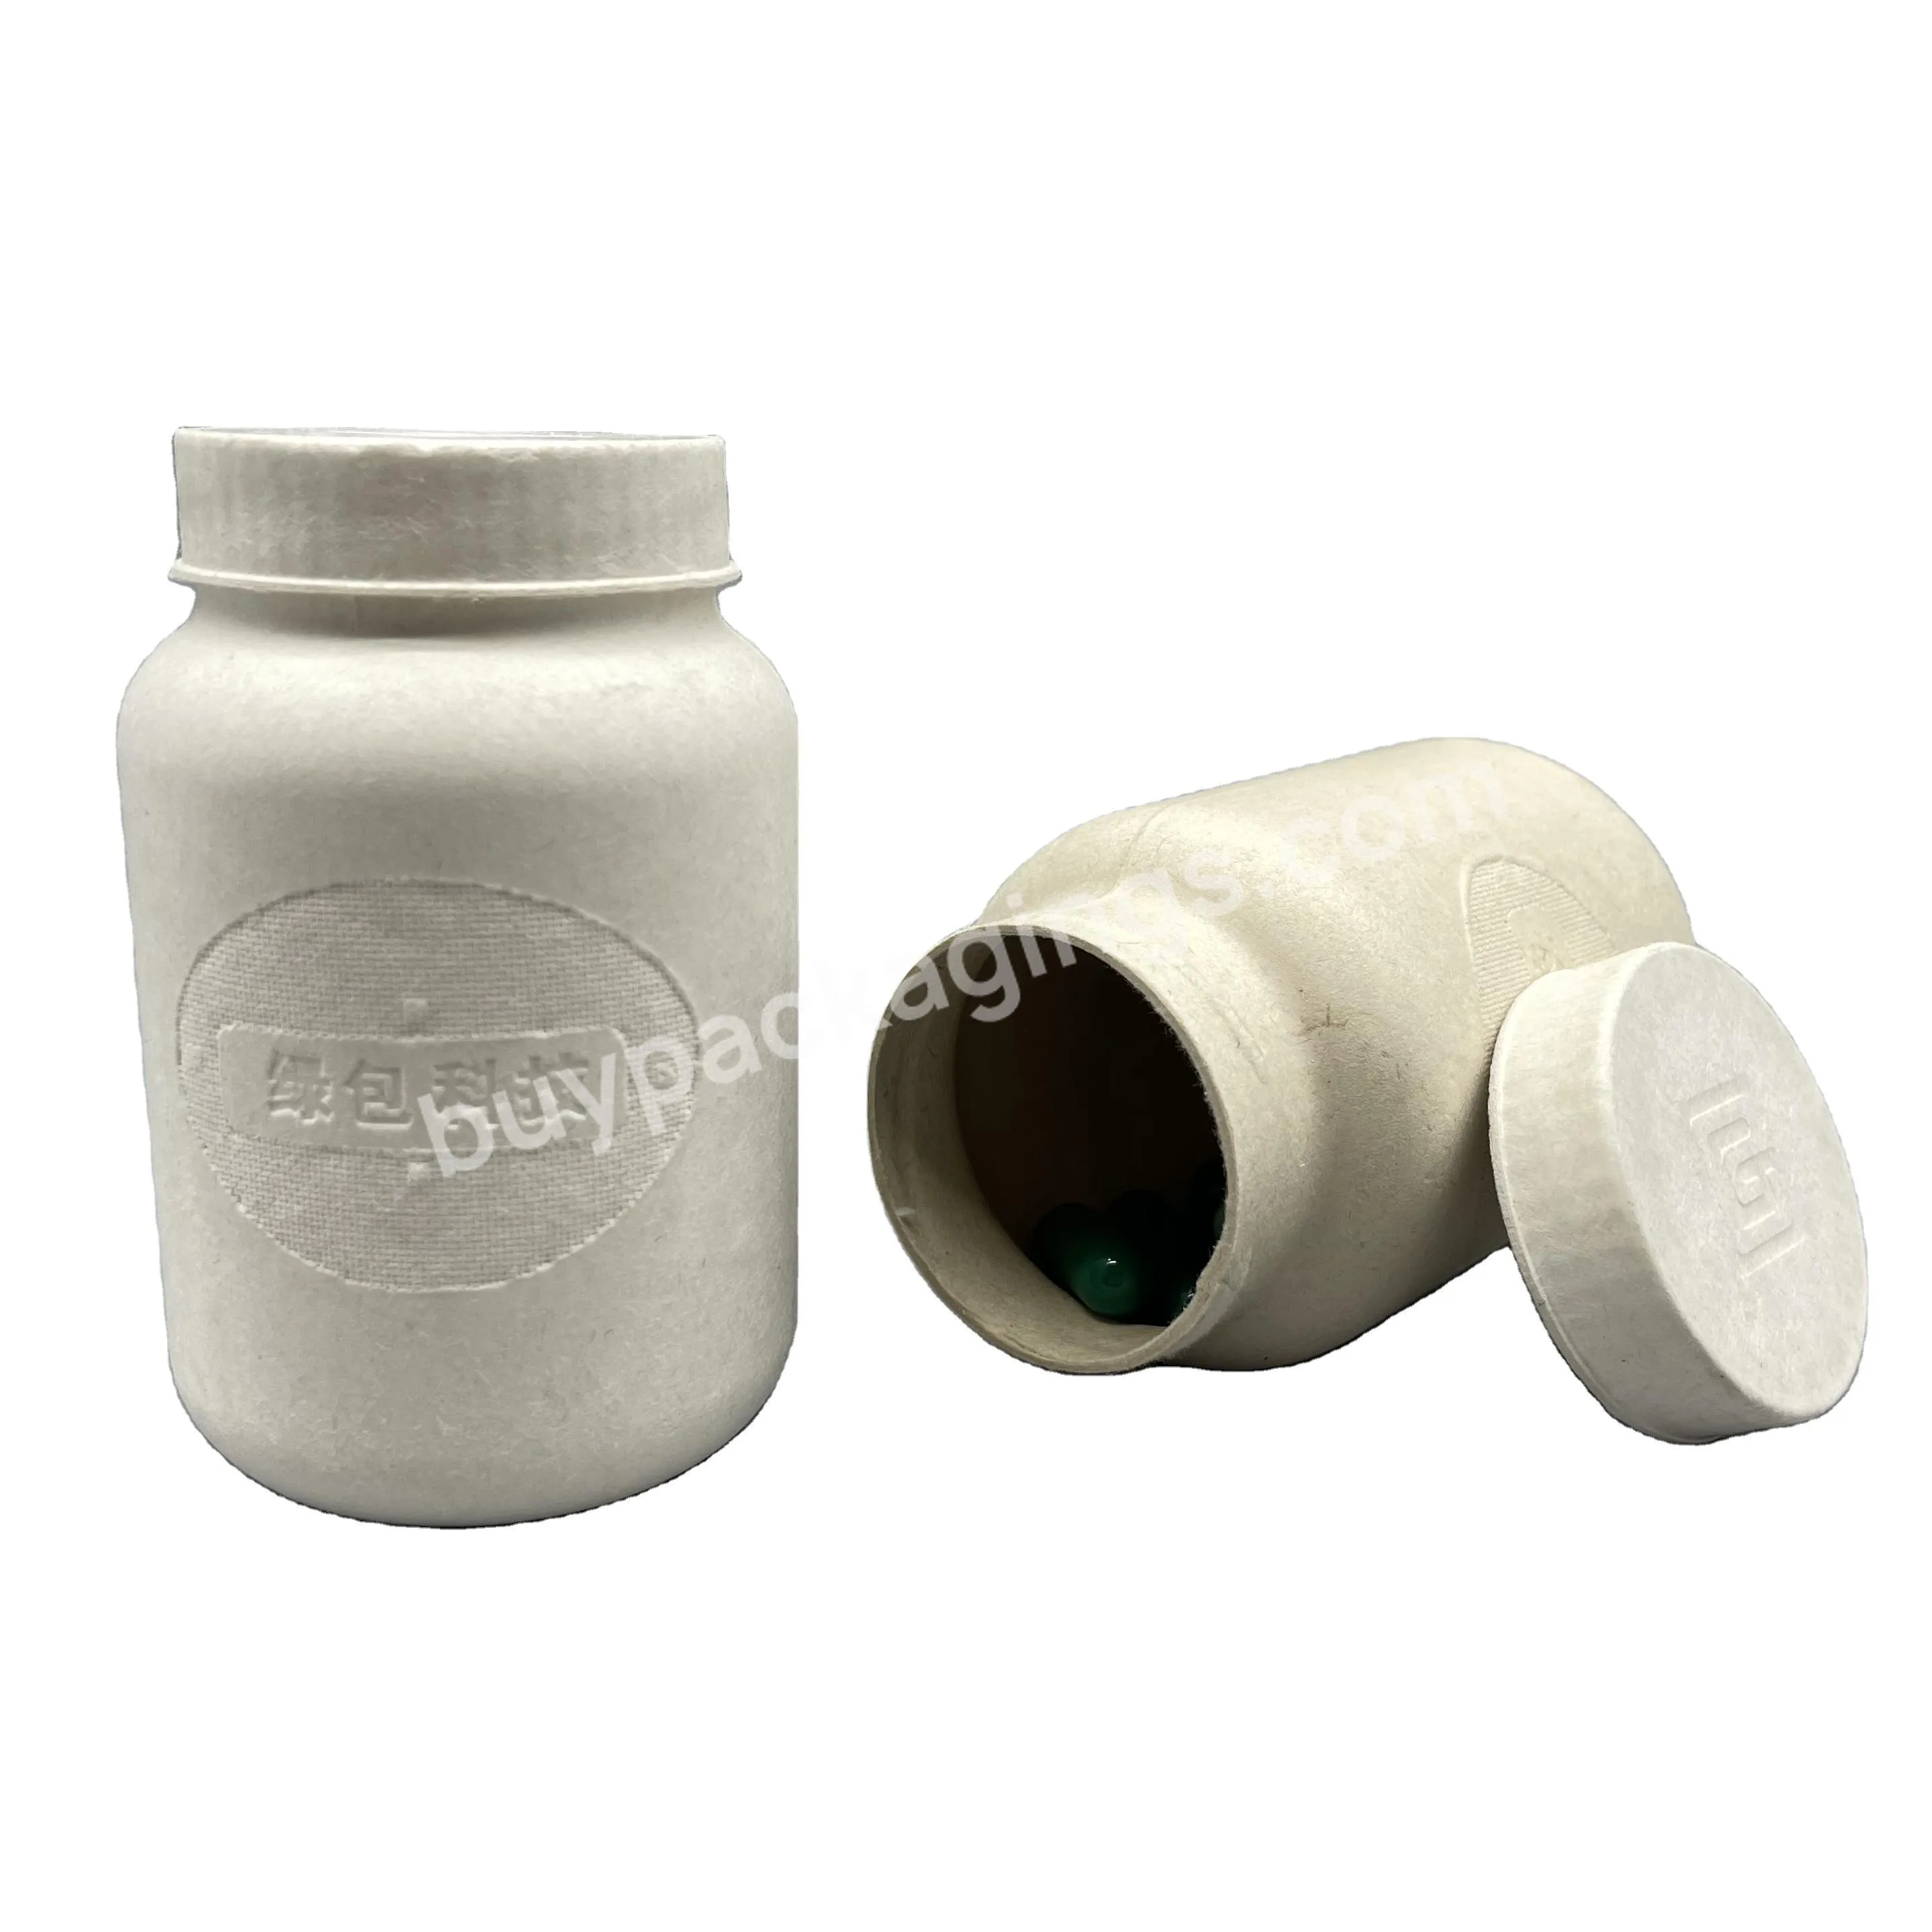 2023 Wholesale High Quality Products Bio-degradable Custom Containers Molded Pulp Packaging Bottle - Buy Mold Pulp Packaging Products,Molded Paper Pulp Packaging Box,Pulp Packaging Mold.